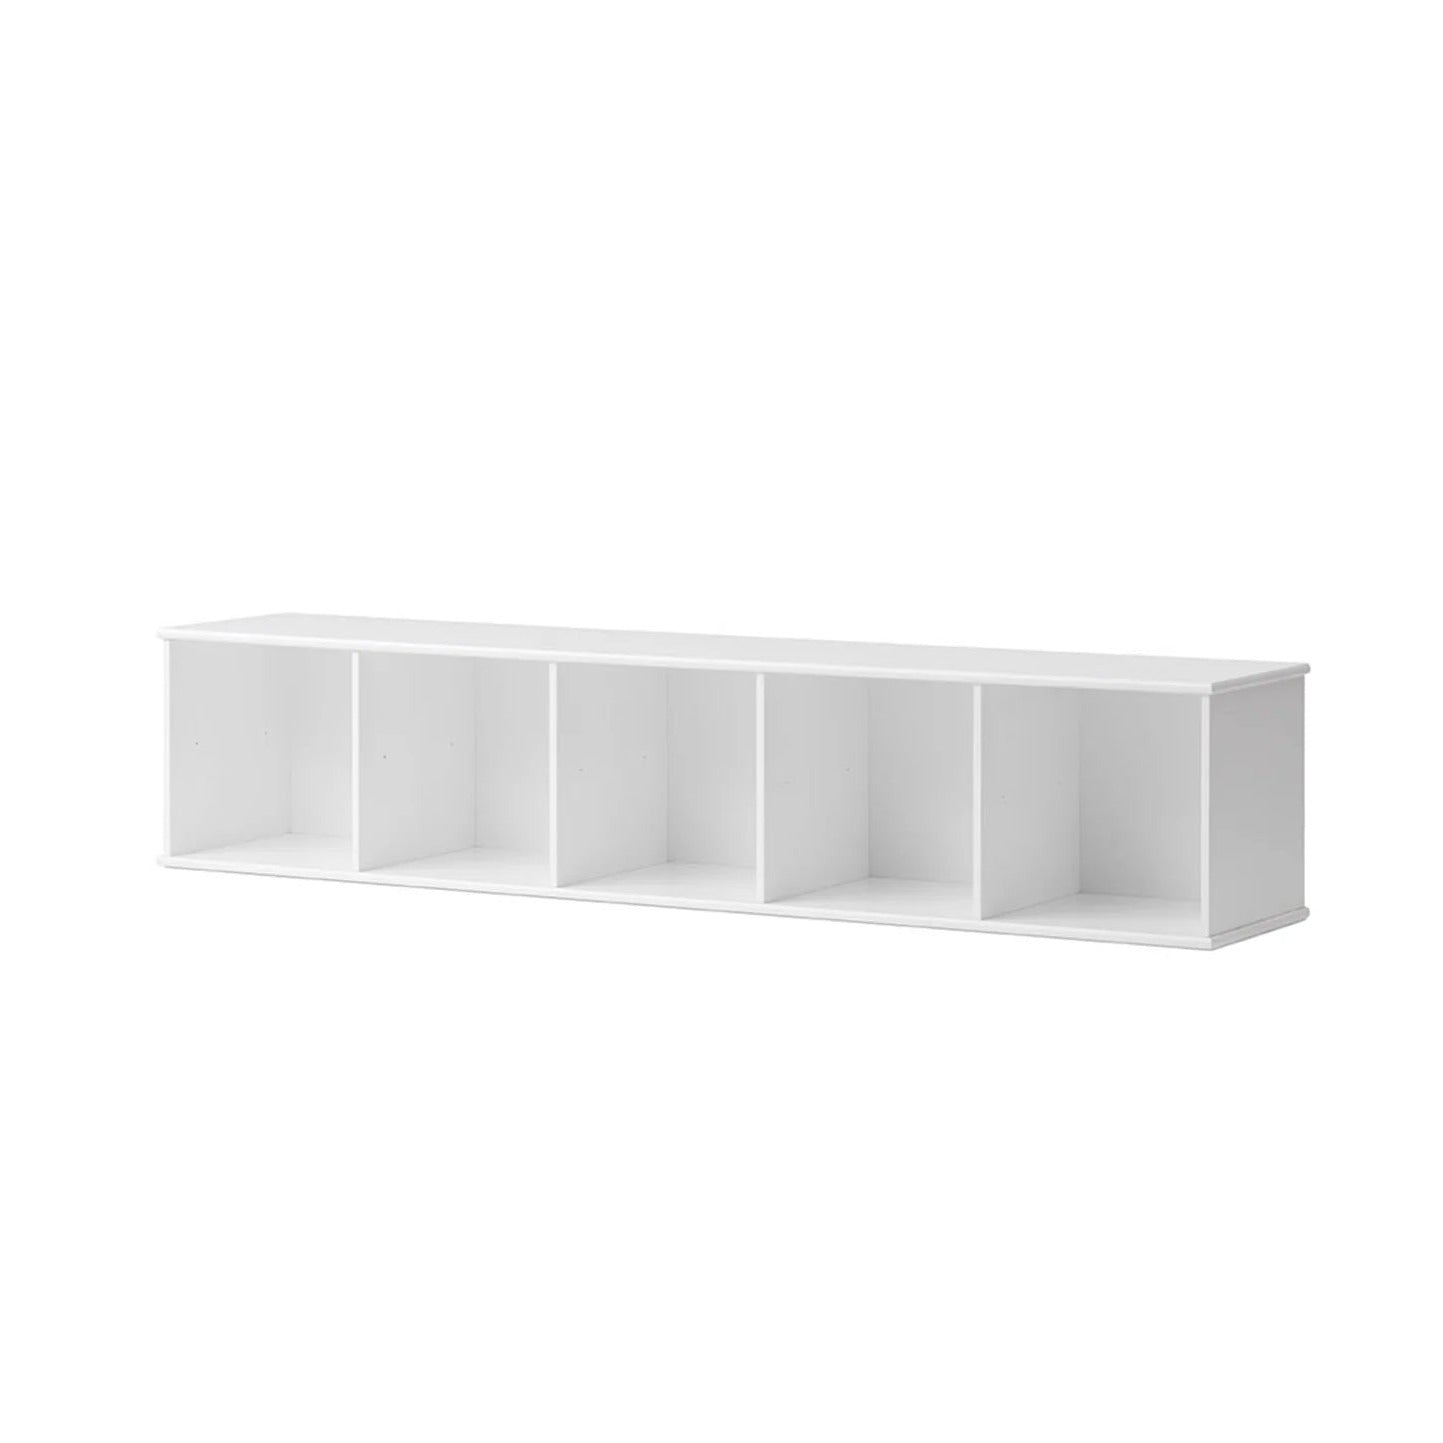 Oliver Furniture Wood Shelving Unit - 5 x 1 With Support